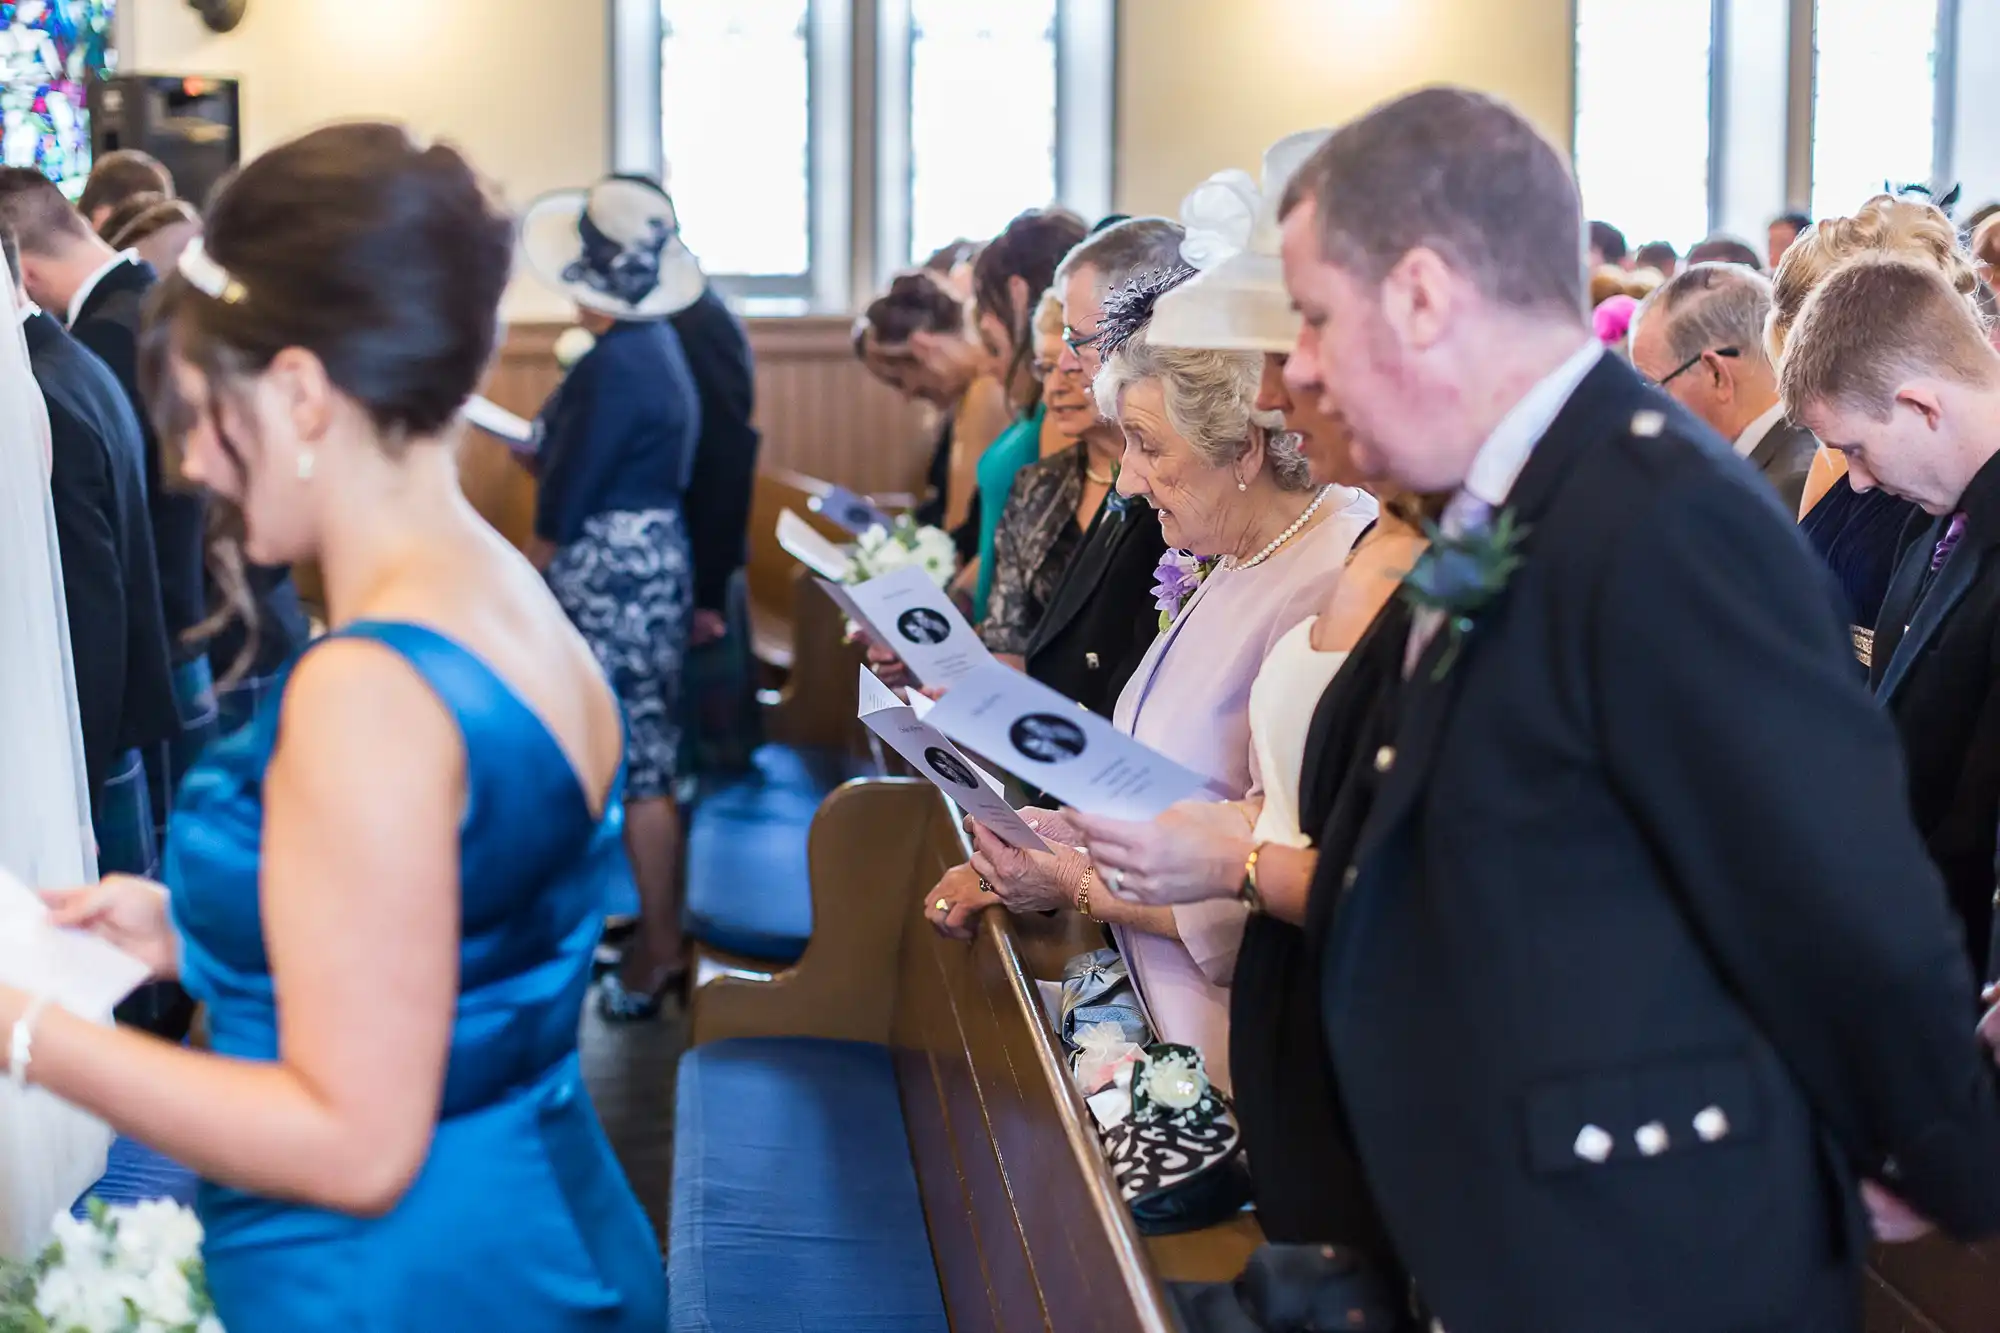 Guests in formal attire reading programs inside a church during a wedding ceremony.